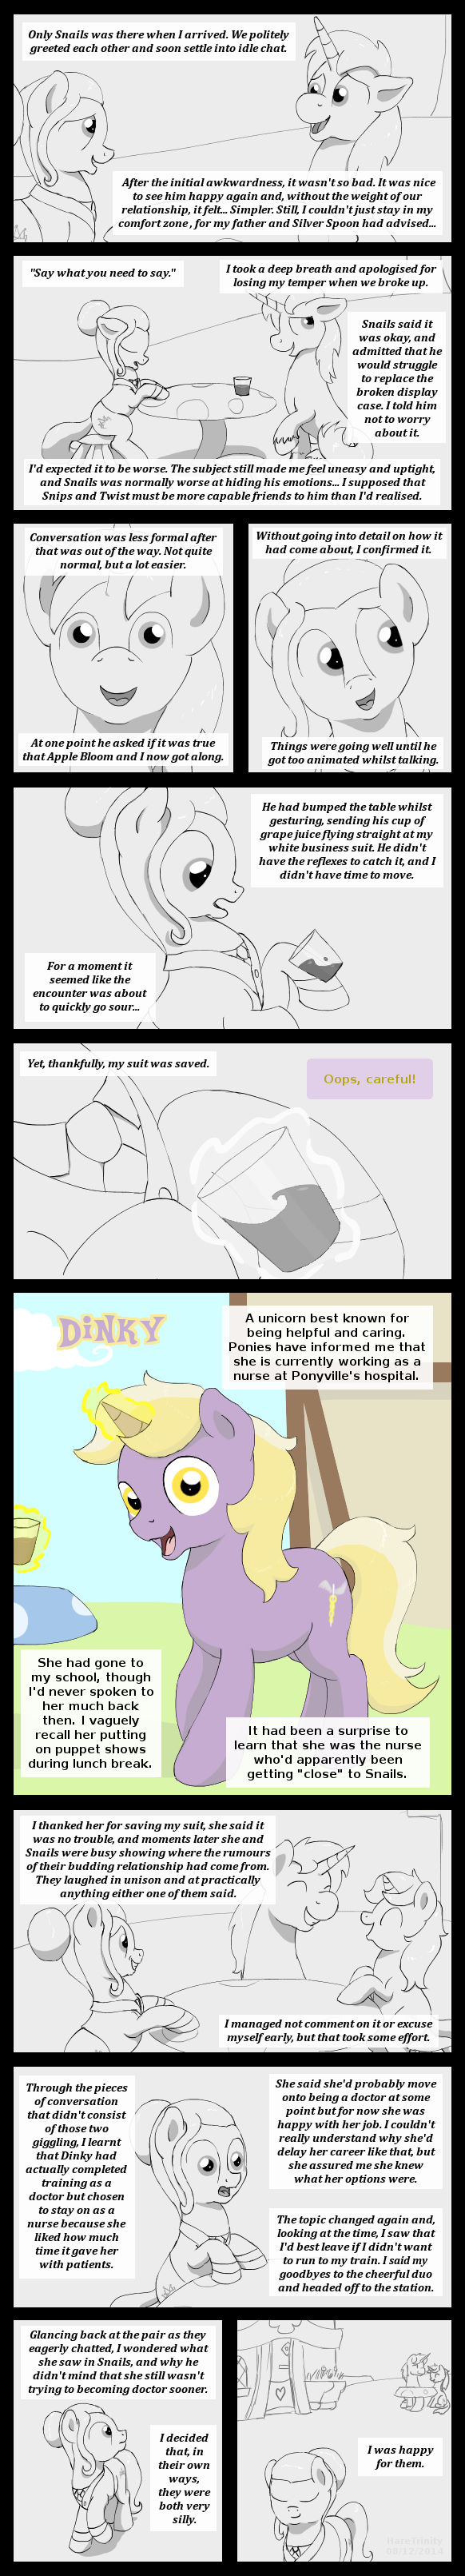 Page 26 - Diamond Tiara meets with her ex